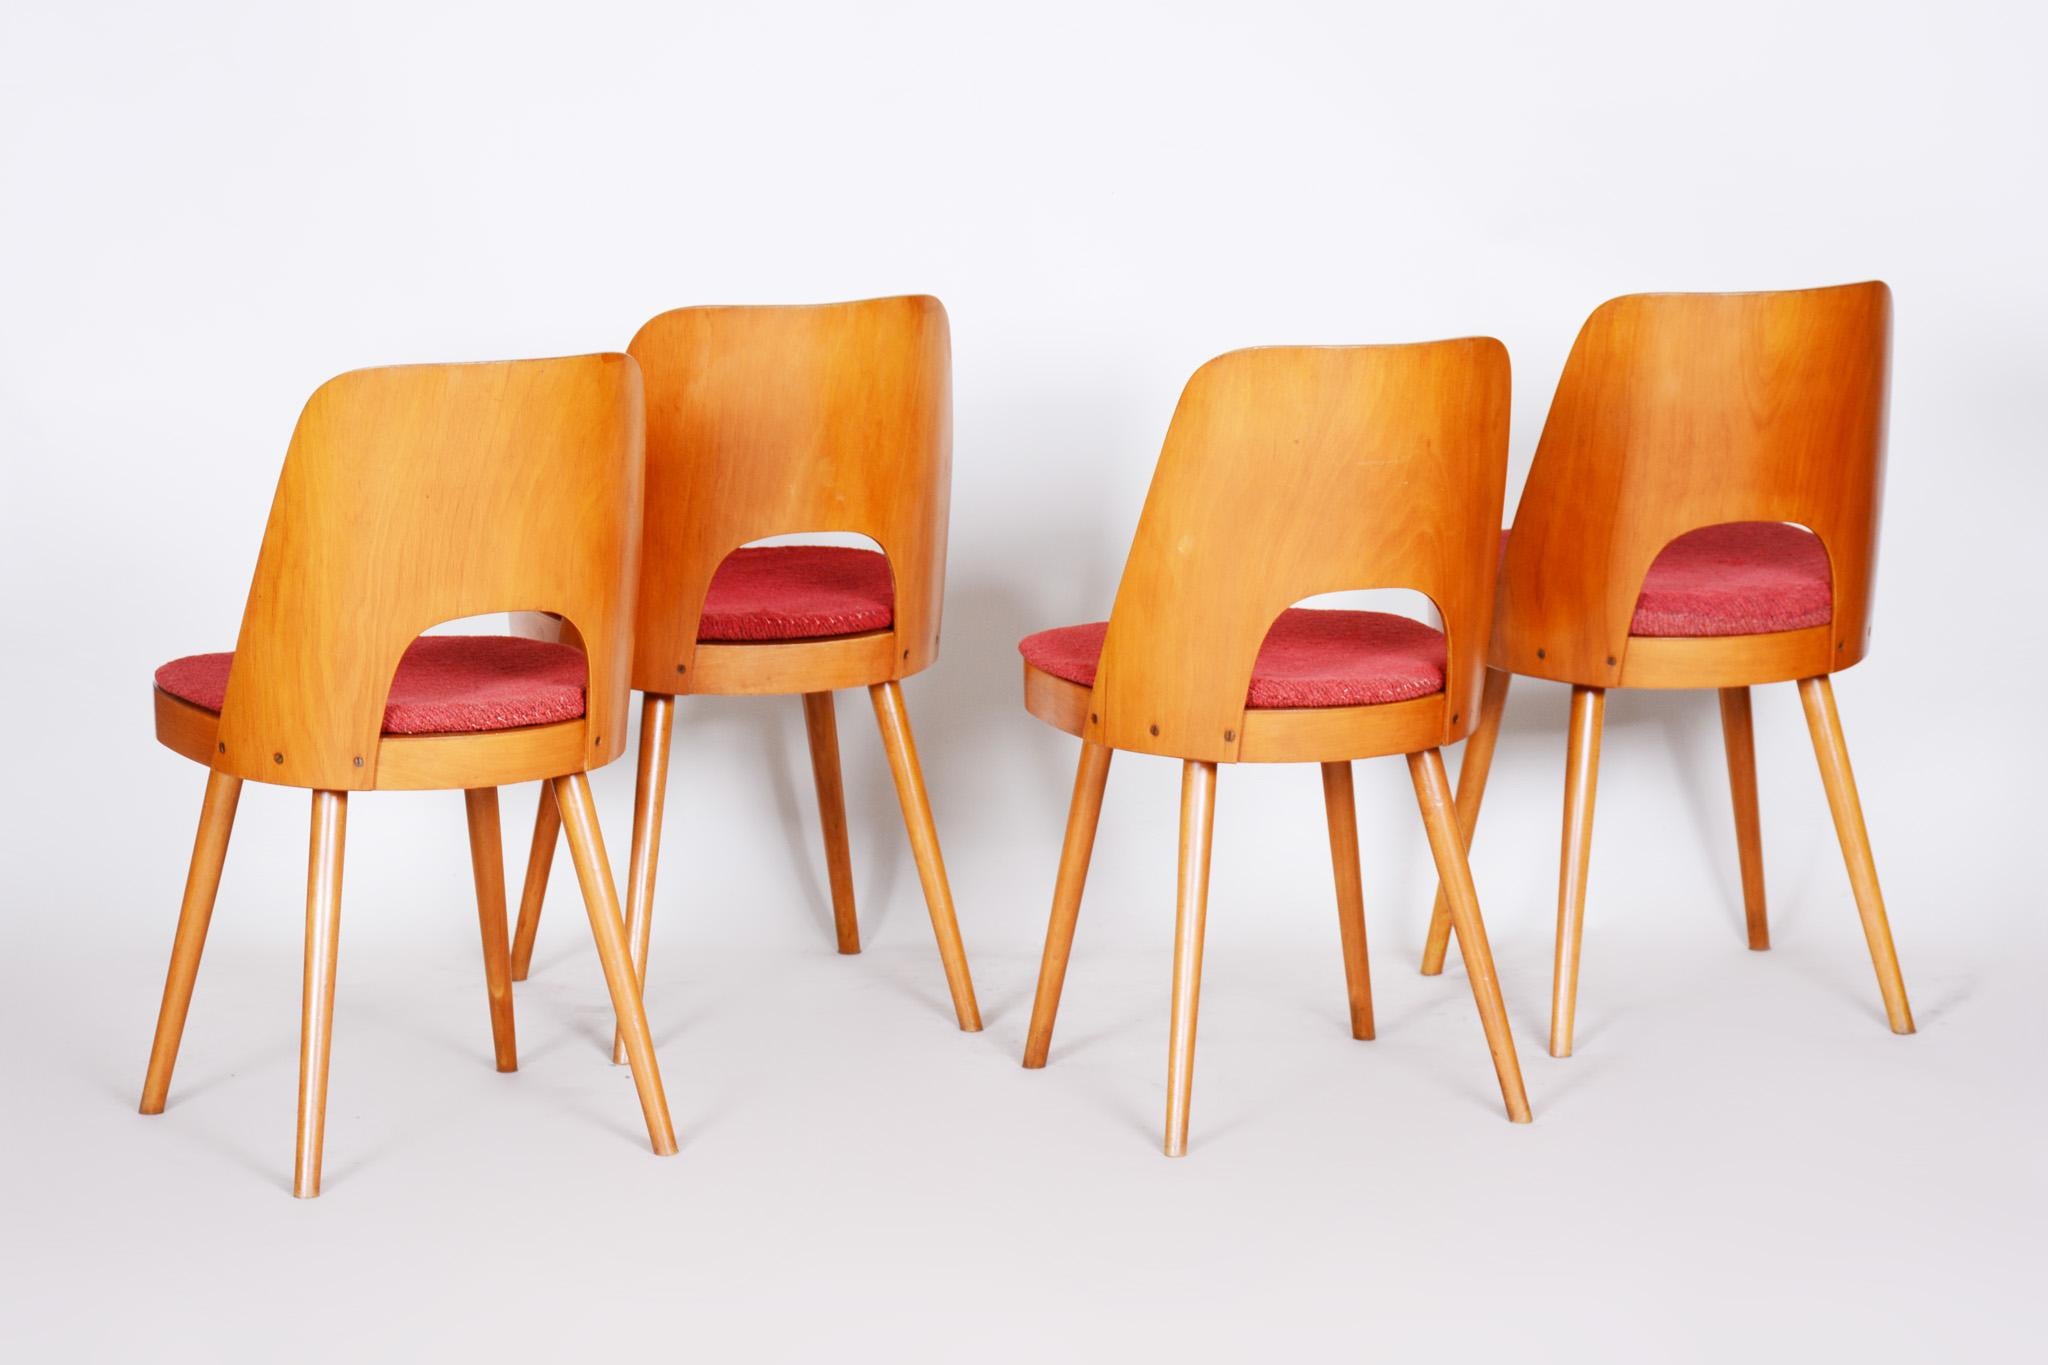 20th Century Well Preserved Czech Brown and Red Beech Chairs by Oswald Haerdtl, 4 Pcs, 1950s